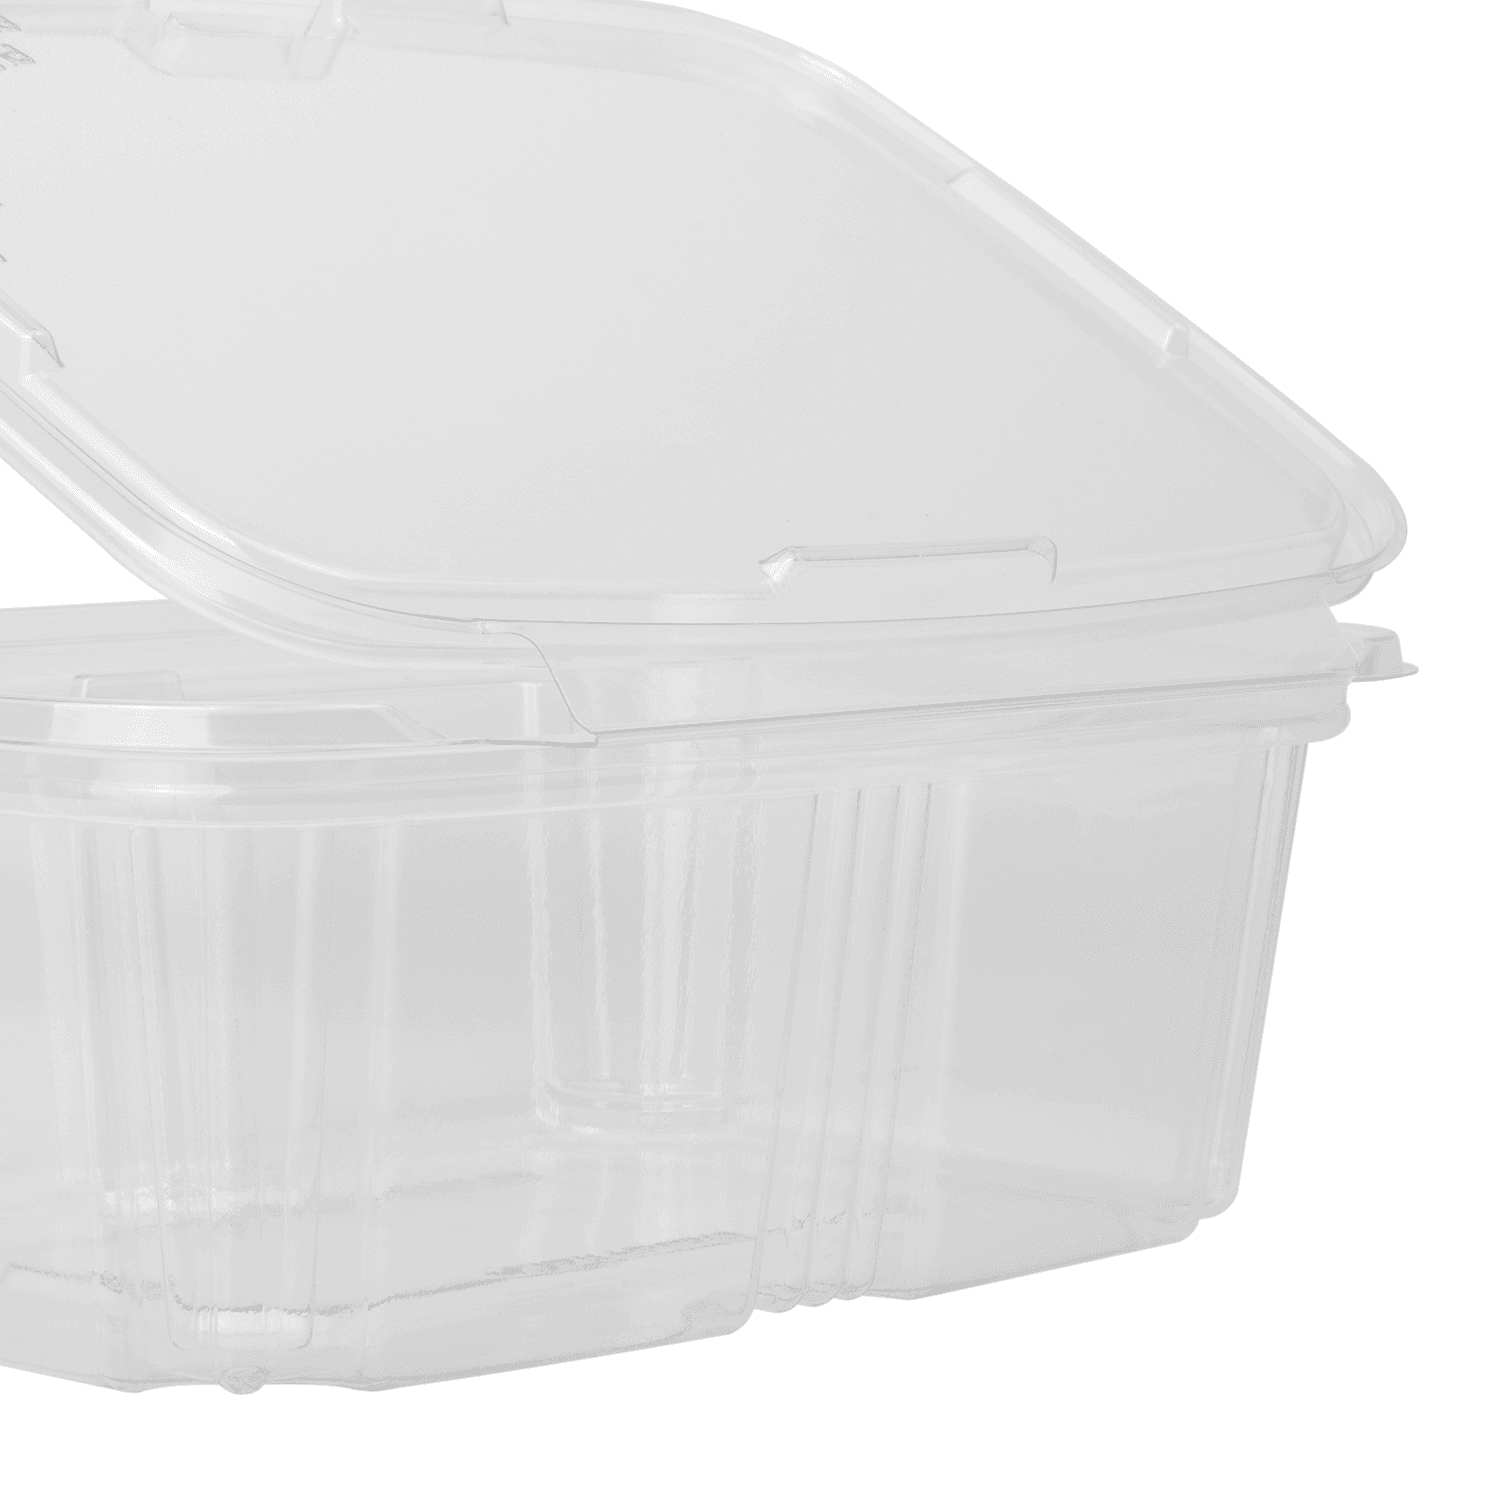 RECESSED LID FOR TAMPERGUARD SNACK BOXES CONTAINERS - Plastic containers